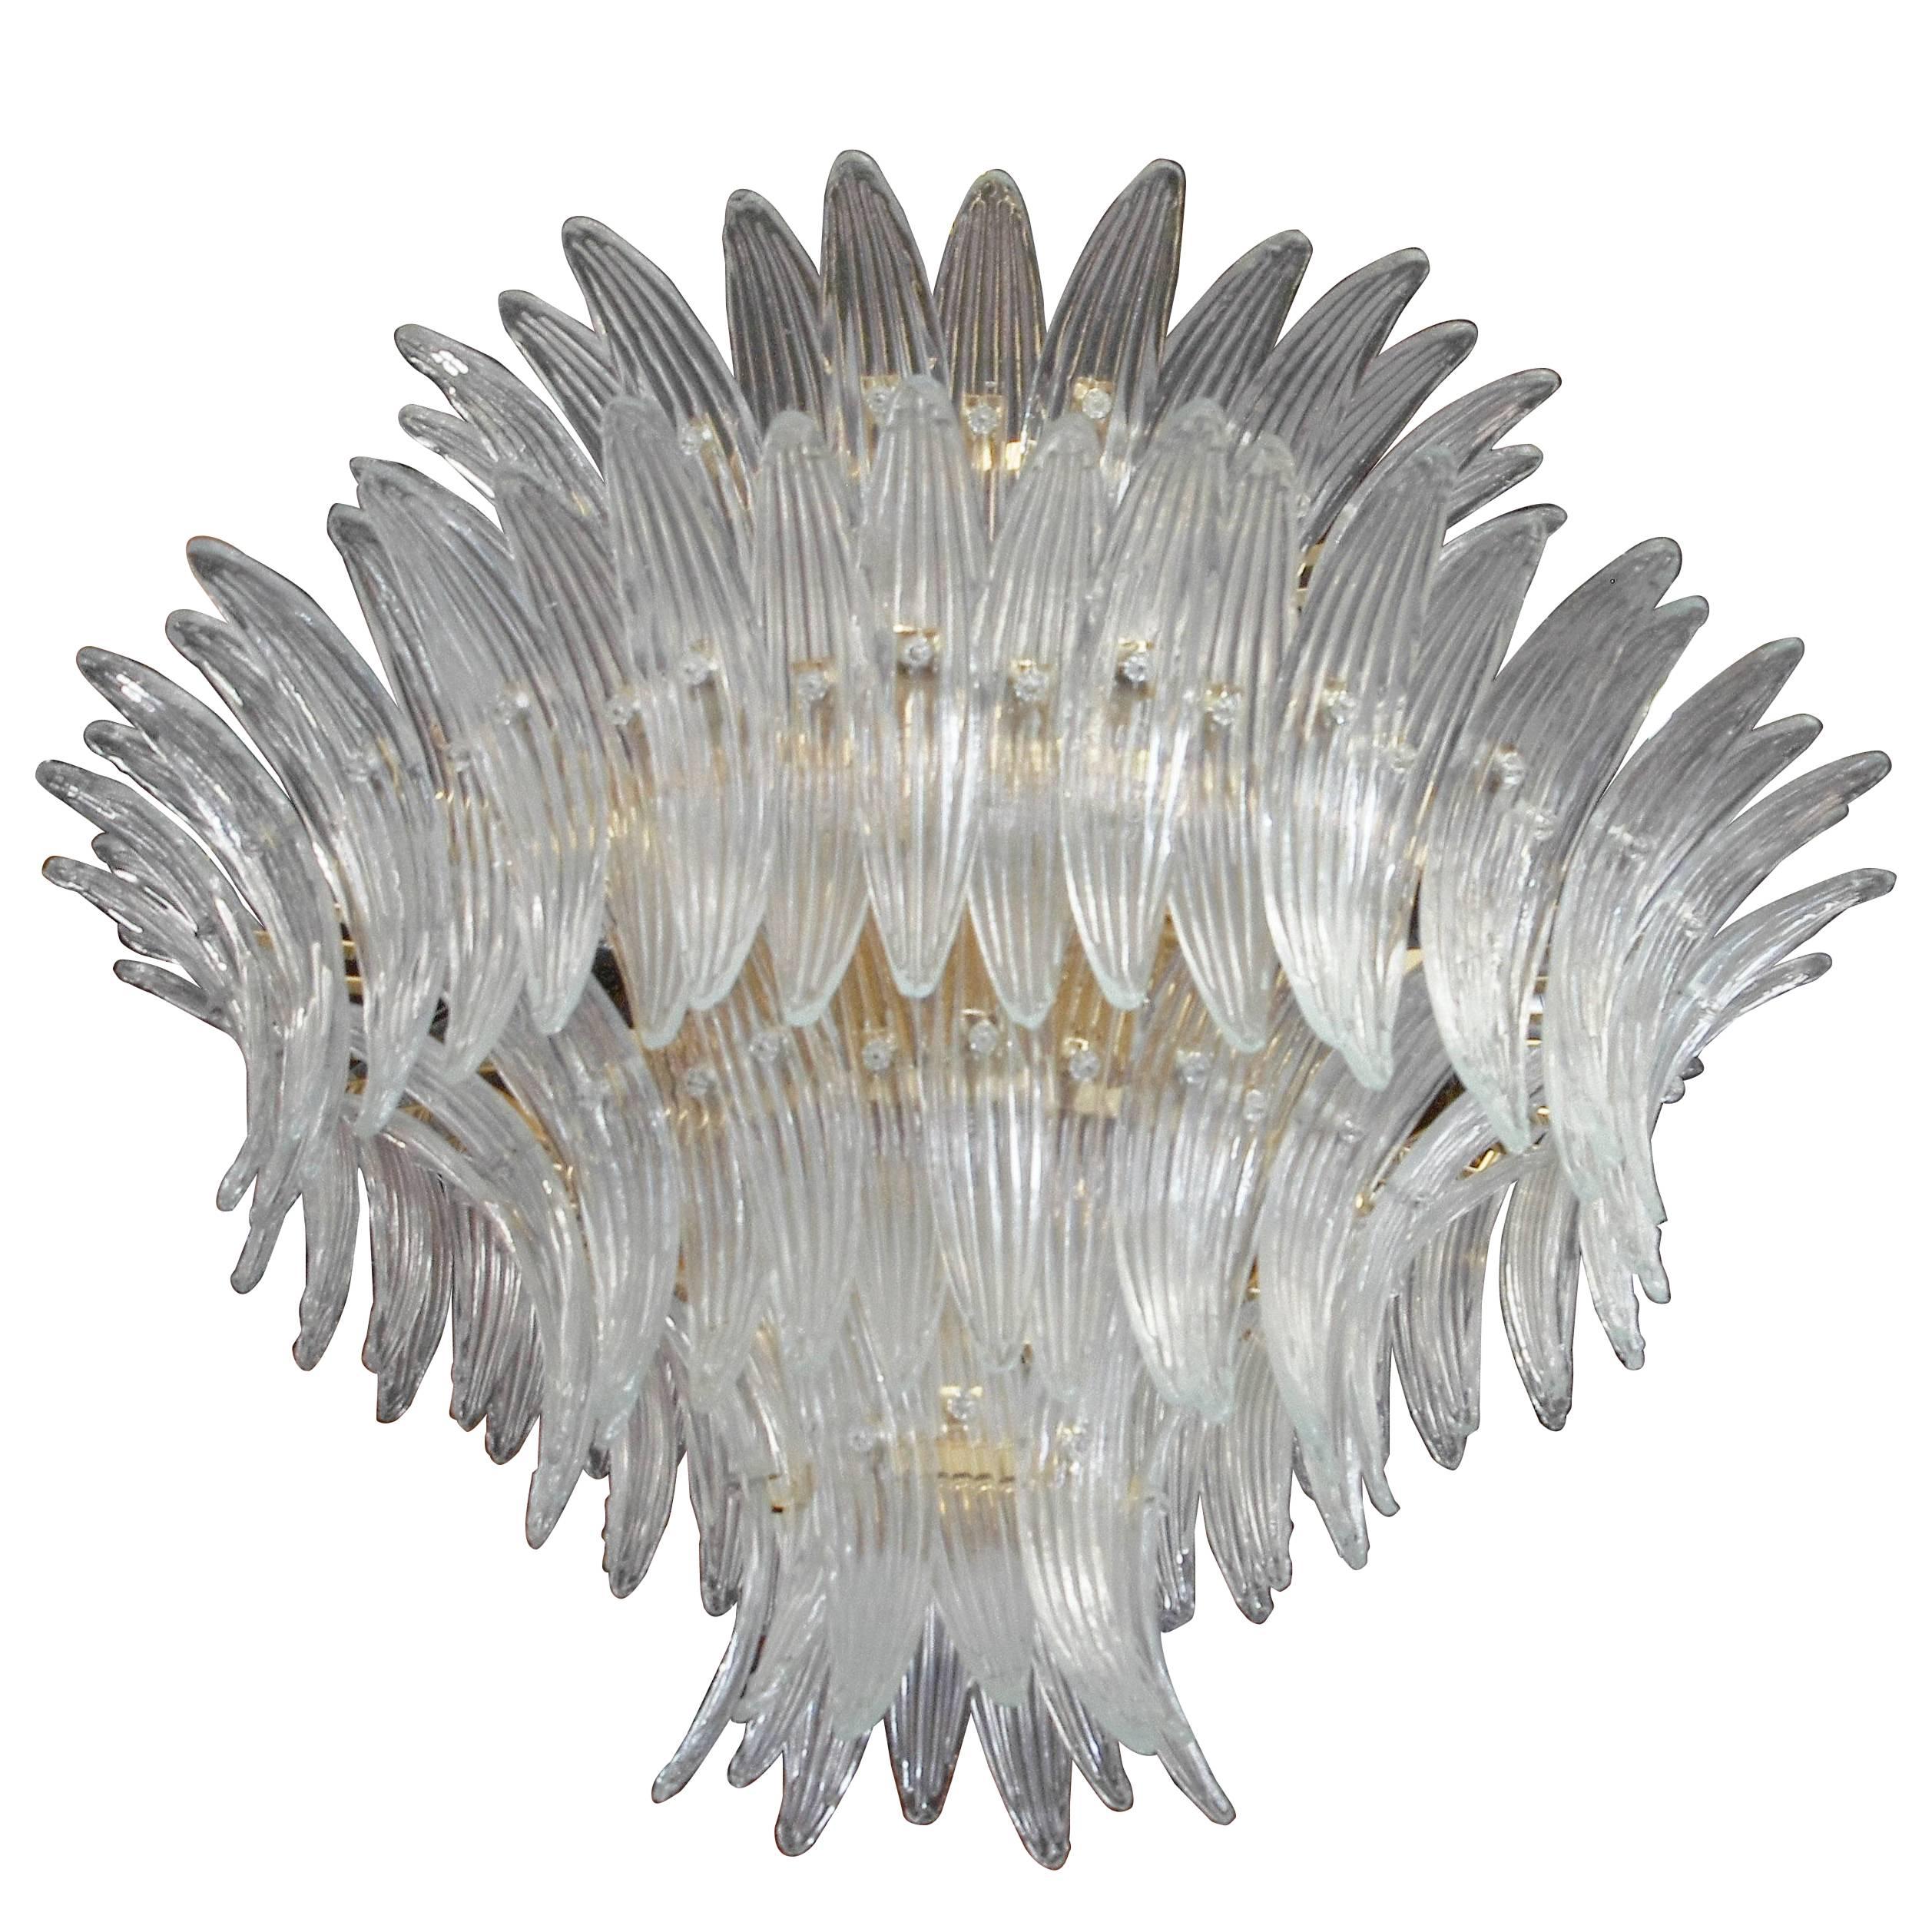 Italian Palmette chandelier with clear Murano glass leaves arranged on four tiers and mounted on gold-plated metal frame by Fabio Ltd / Made in Italy
16 lights / E26 or E27 type / max 60W each
Diameter: 36 inches / Height: 27 inches plus chain and